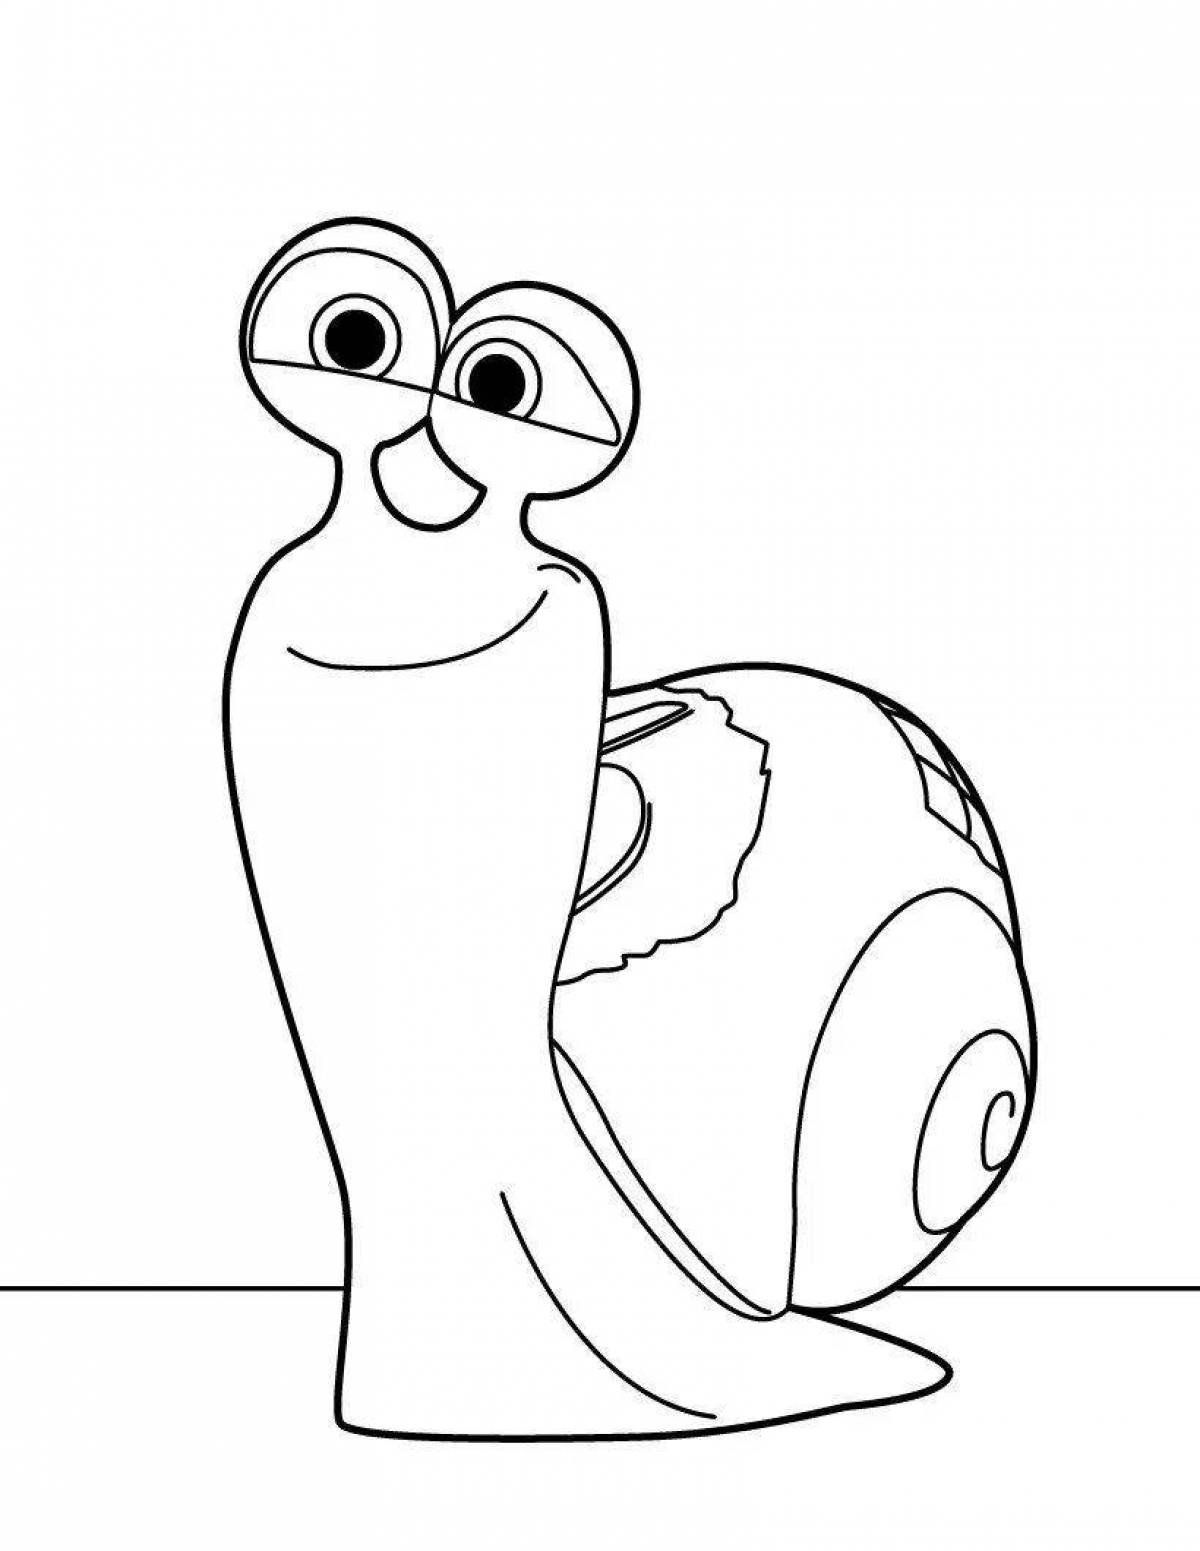 Coloring cute turbo snail